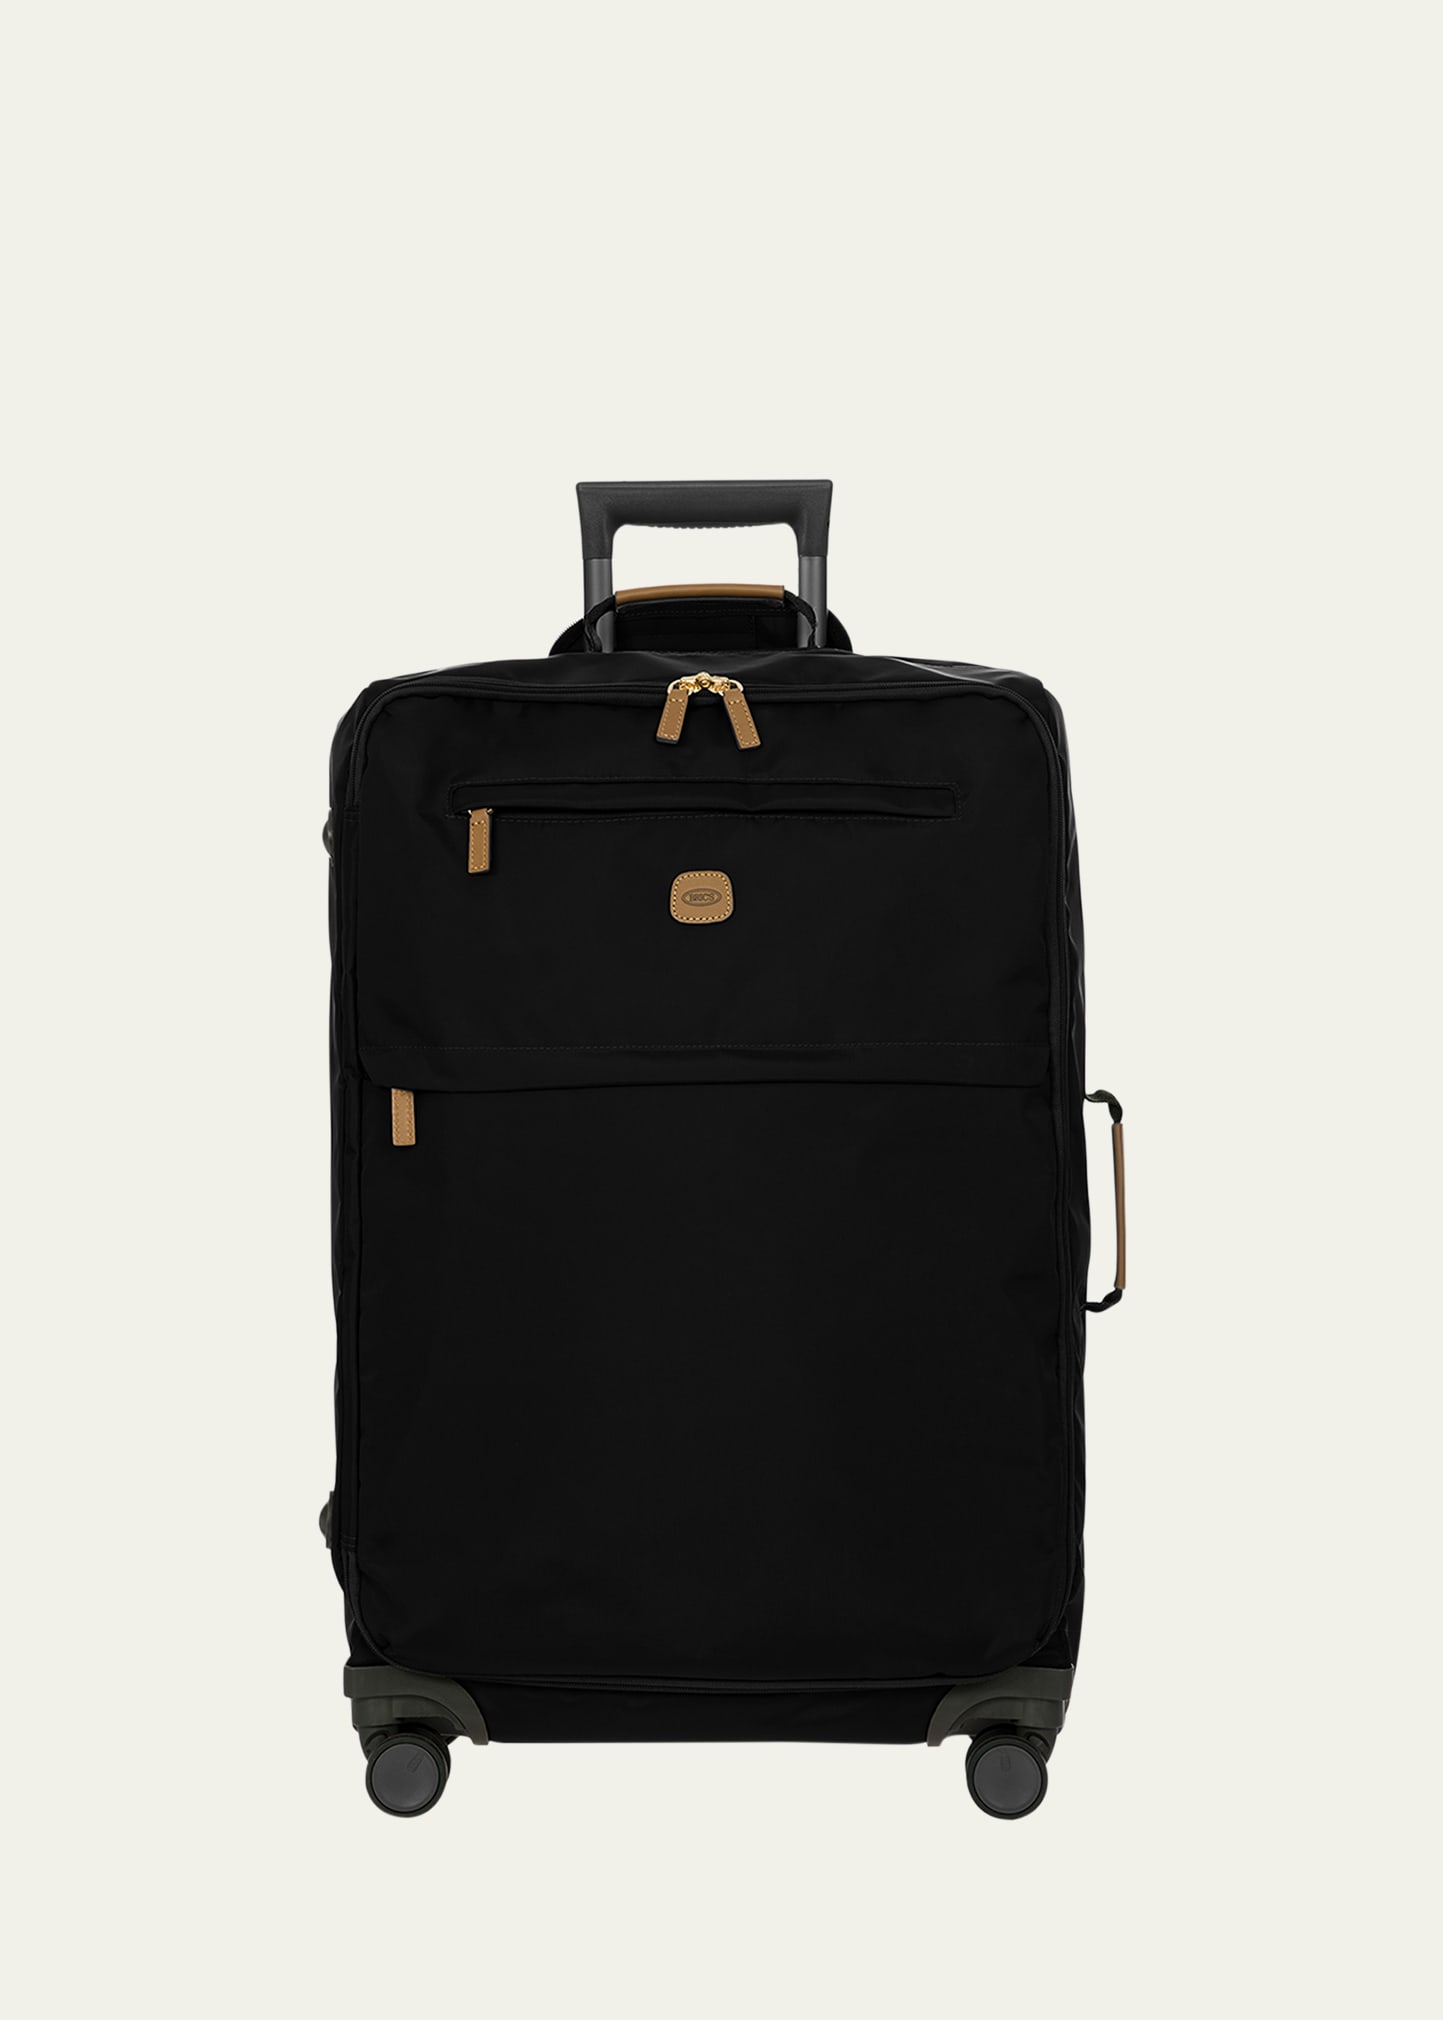 X-Travel Spinner Luggage, 27"